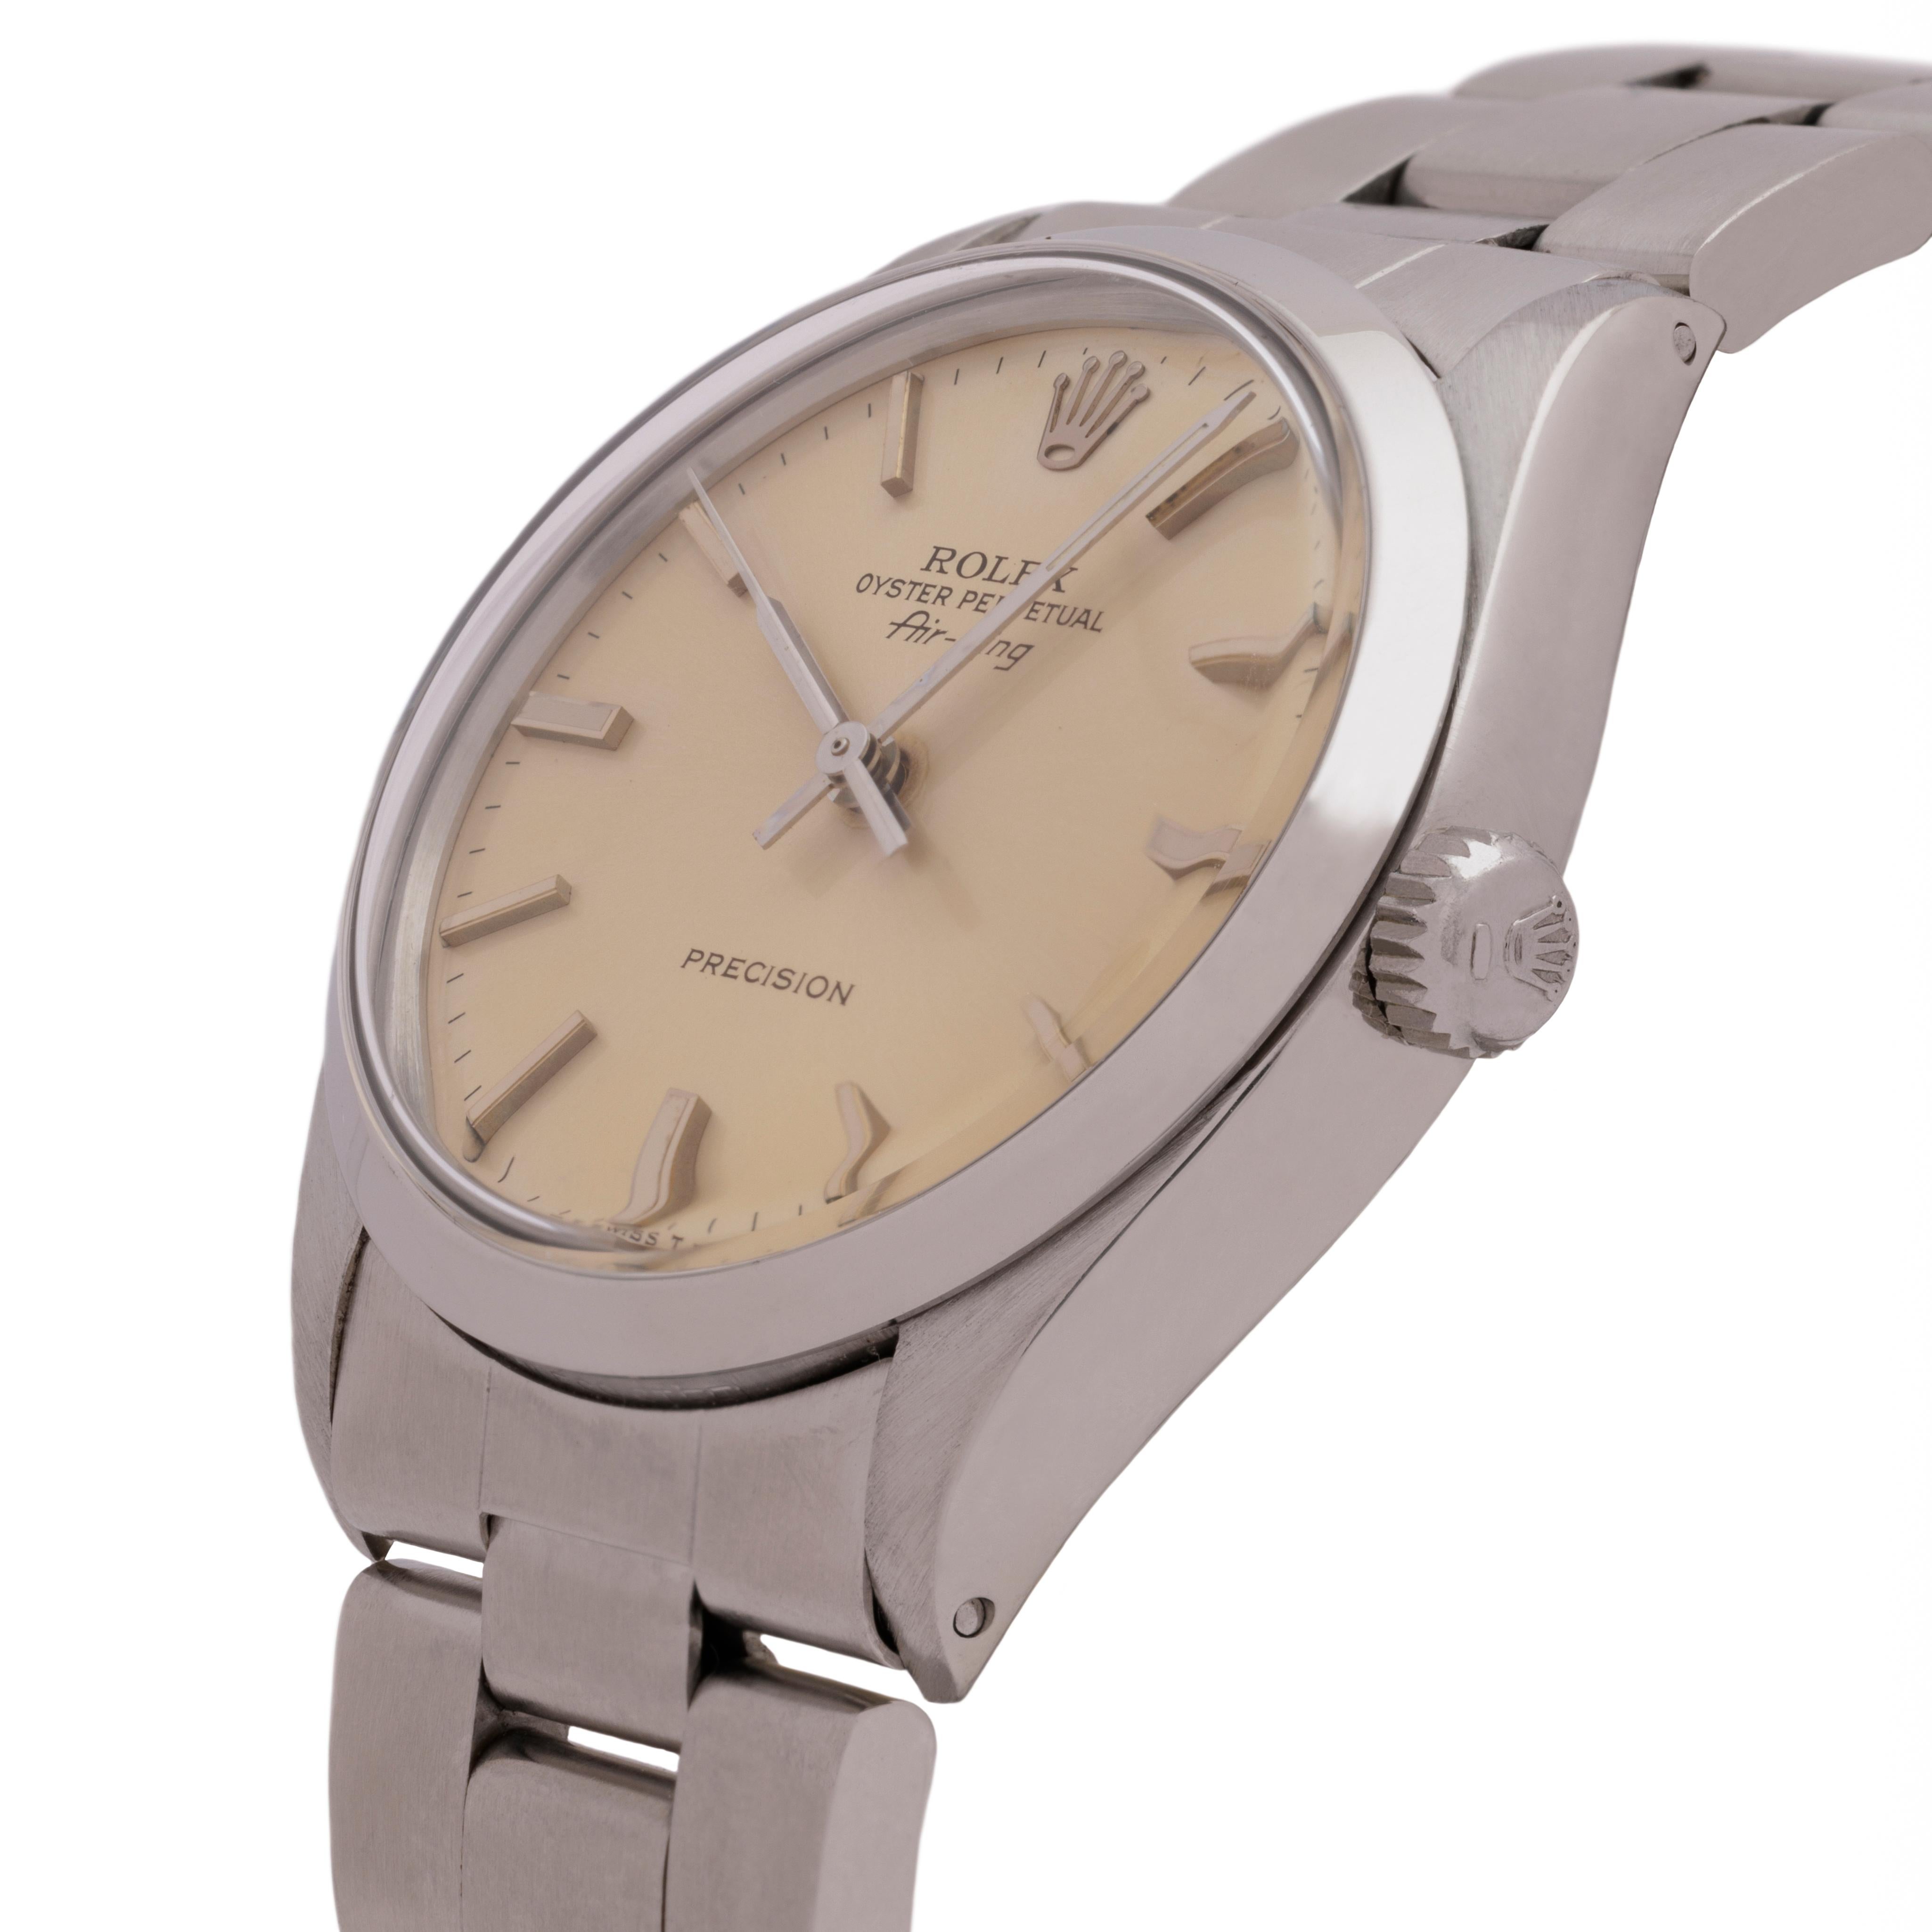 1983 rolex oyster perpetual